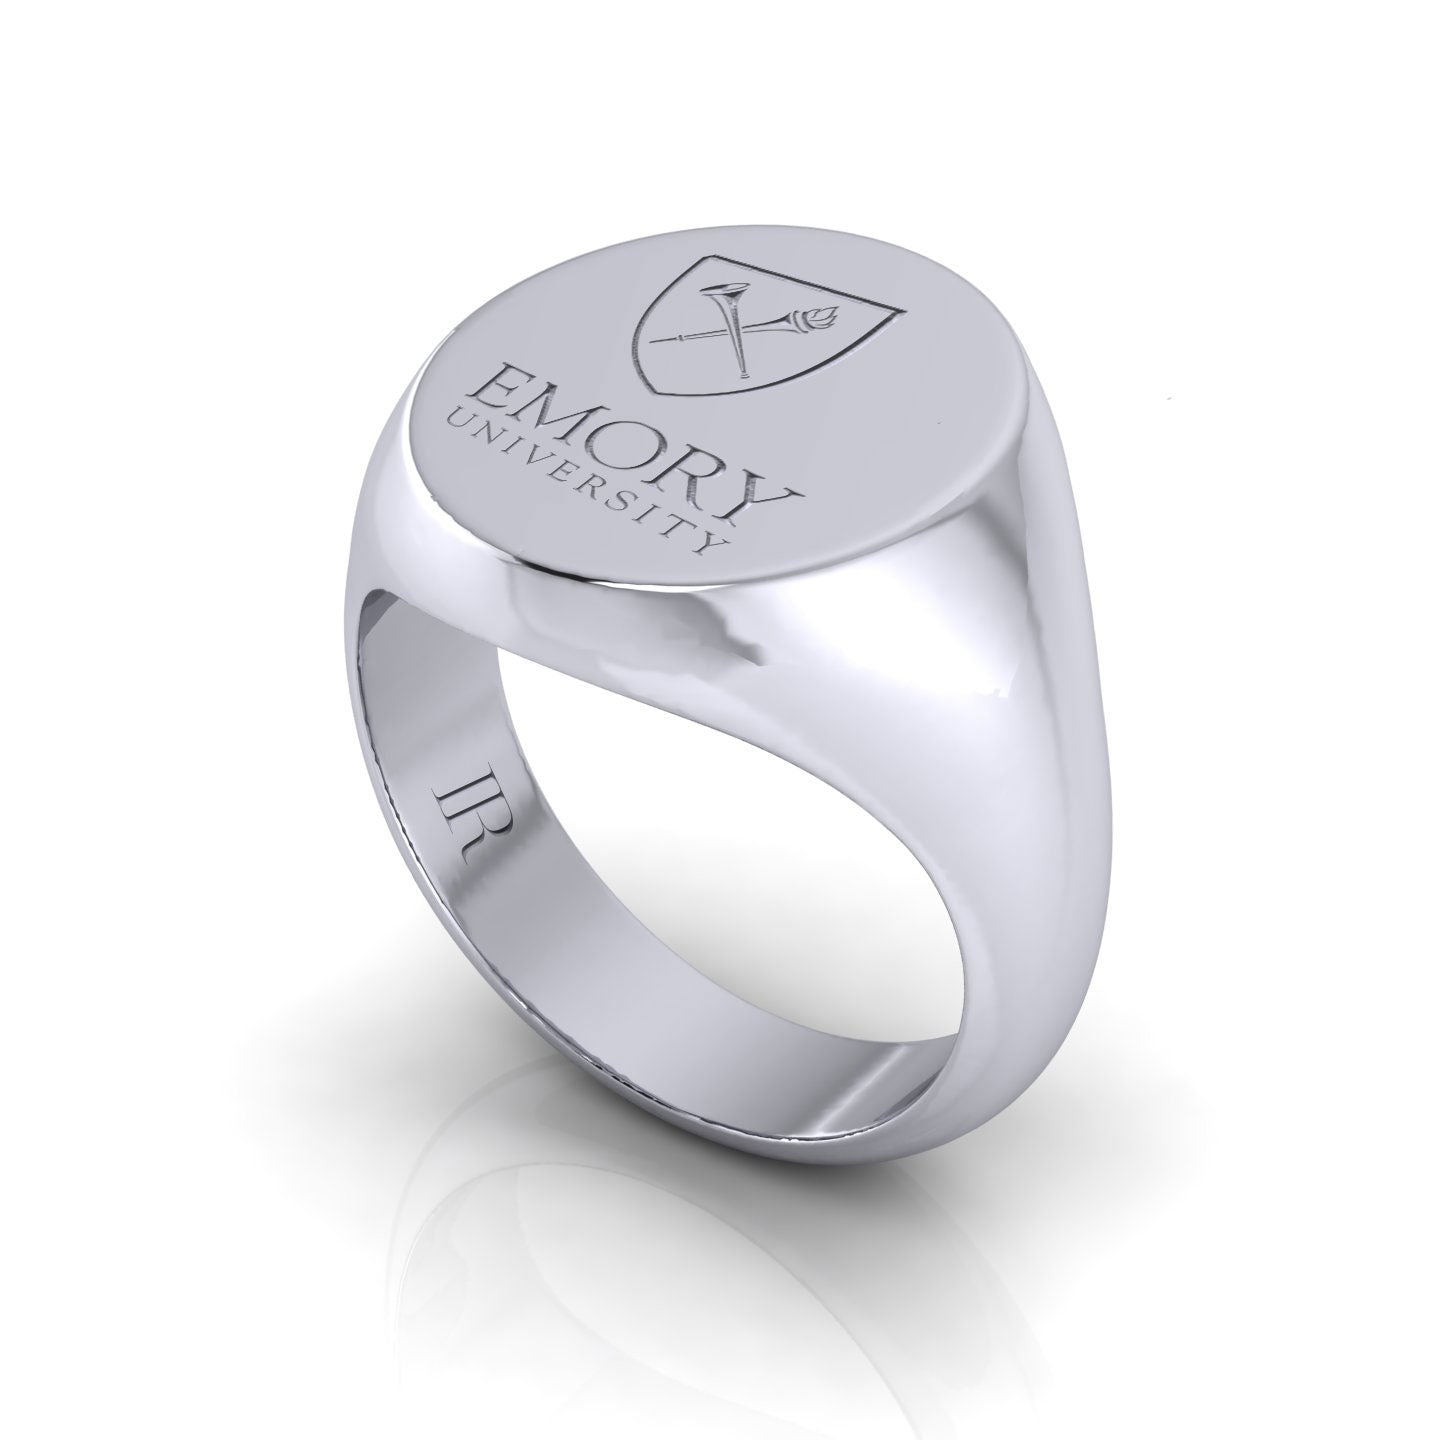 Side view of the Emory Ivy Signet Class Ring in sterling silver, showing off the classic contours and attention to detail in its design.